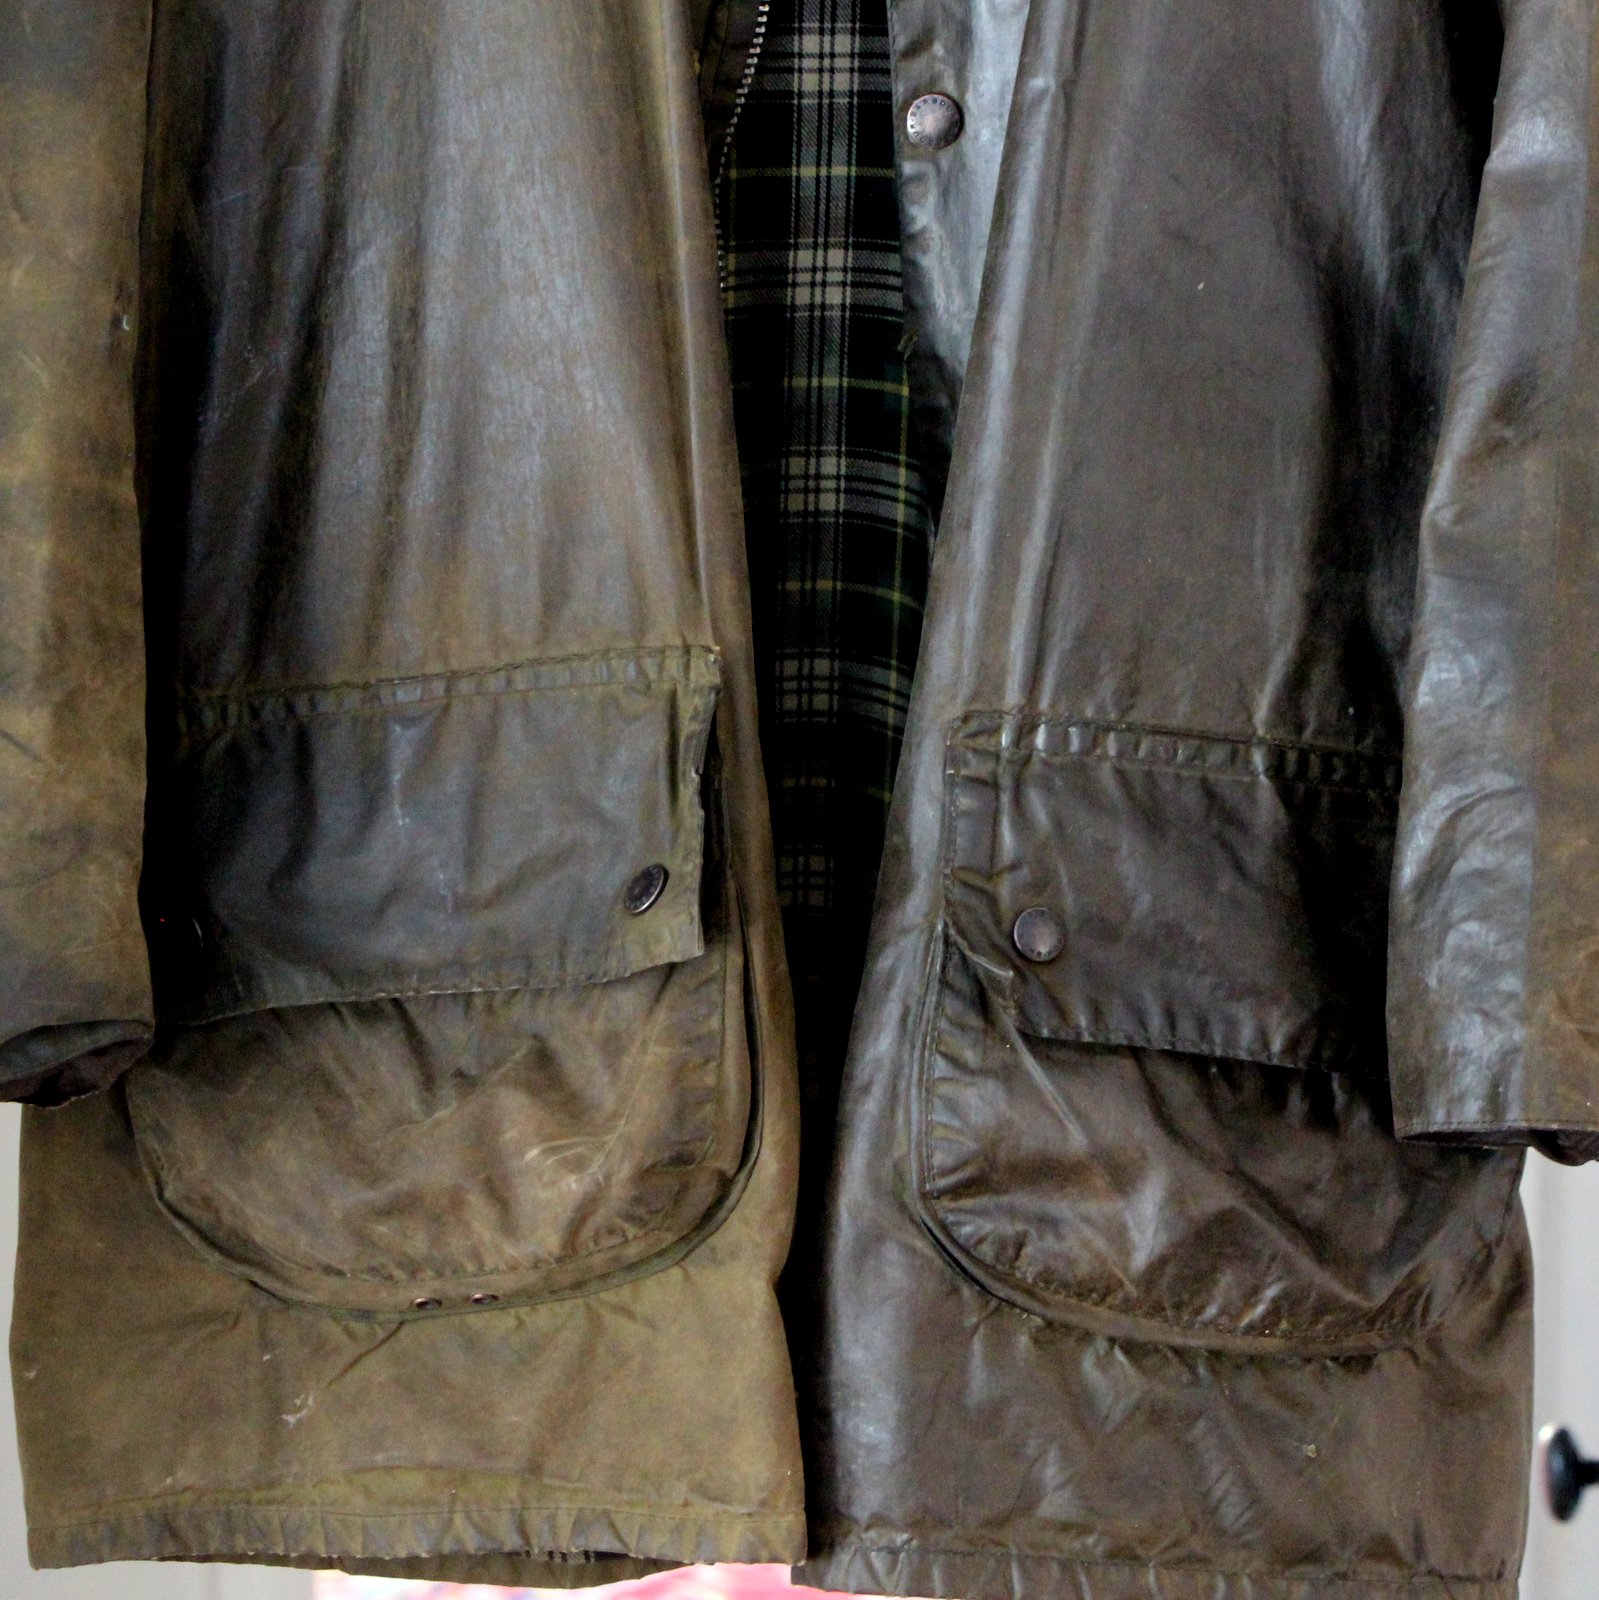 barbour reproofing wax spray